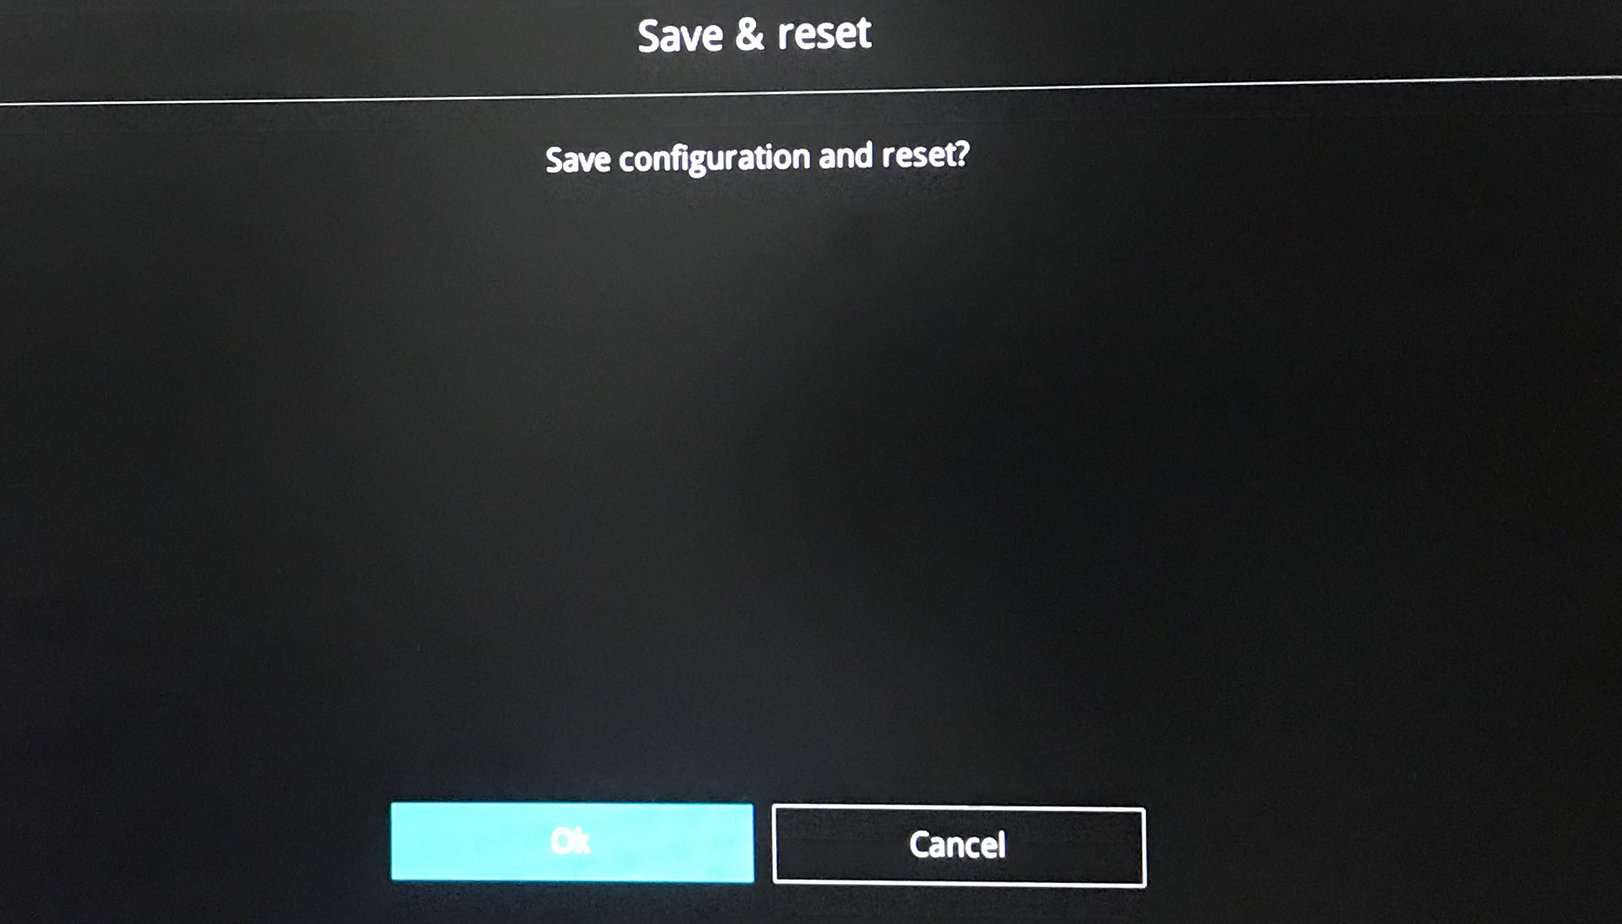 yes to save and reset